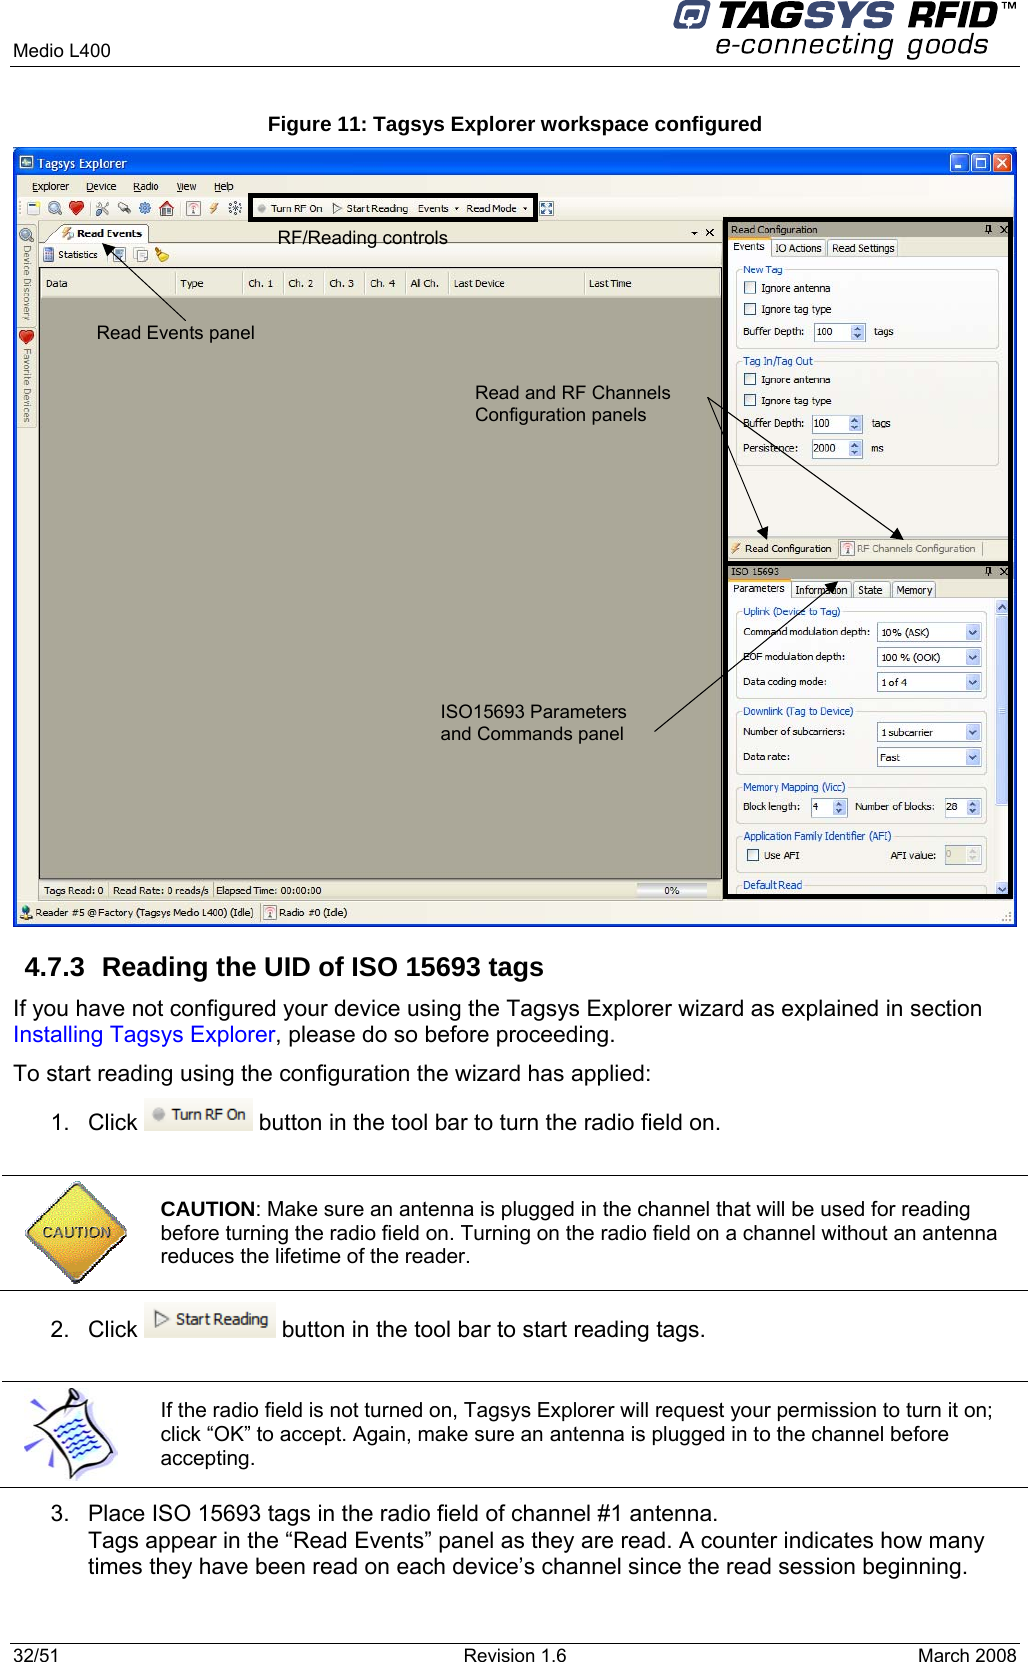  Medio L400     32/51  Revision 1.6  March 2008  Figure 11: Tagsys Explorer workspace configured  4.7.3  Reading the UID of ISO 15693 tags If you have not configured your device using the Tagsys Explorer wizard as explained in section Installing Tagsys Explorer, please do so before proceeding. To start reading using the configuration the wizard has applied: 1. Click   button in the tool bar to turn the radio field on.   CAUTION: Make sure an antenna is plugged in the channel that will be used for reading before turning the radio field on. Turning on the radio field on a channel without an antenna reduces the lifetime of the reader. 2. Click   button in the tool bar to start reading tags.   If the radio field is not turned on, Tagsys Explorer will request your permission to turn it on; click “OK” to accept. Again, make sure an antenna is plugged in to the channel before accepting. 3.  Place ISO 15693 tags in the radio field of channel #1 antenna. Tags appear in the “Read Events” panel as they are read. A counter indicates how many times they have been read on each device’s channel since the read session beginning. RF/Reading controls Read Events panel  Read and RF Channels Configuration panels   ISO15693 Parameters and Commands panel 